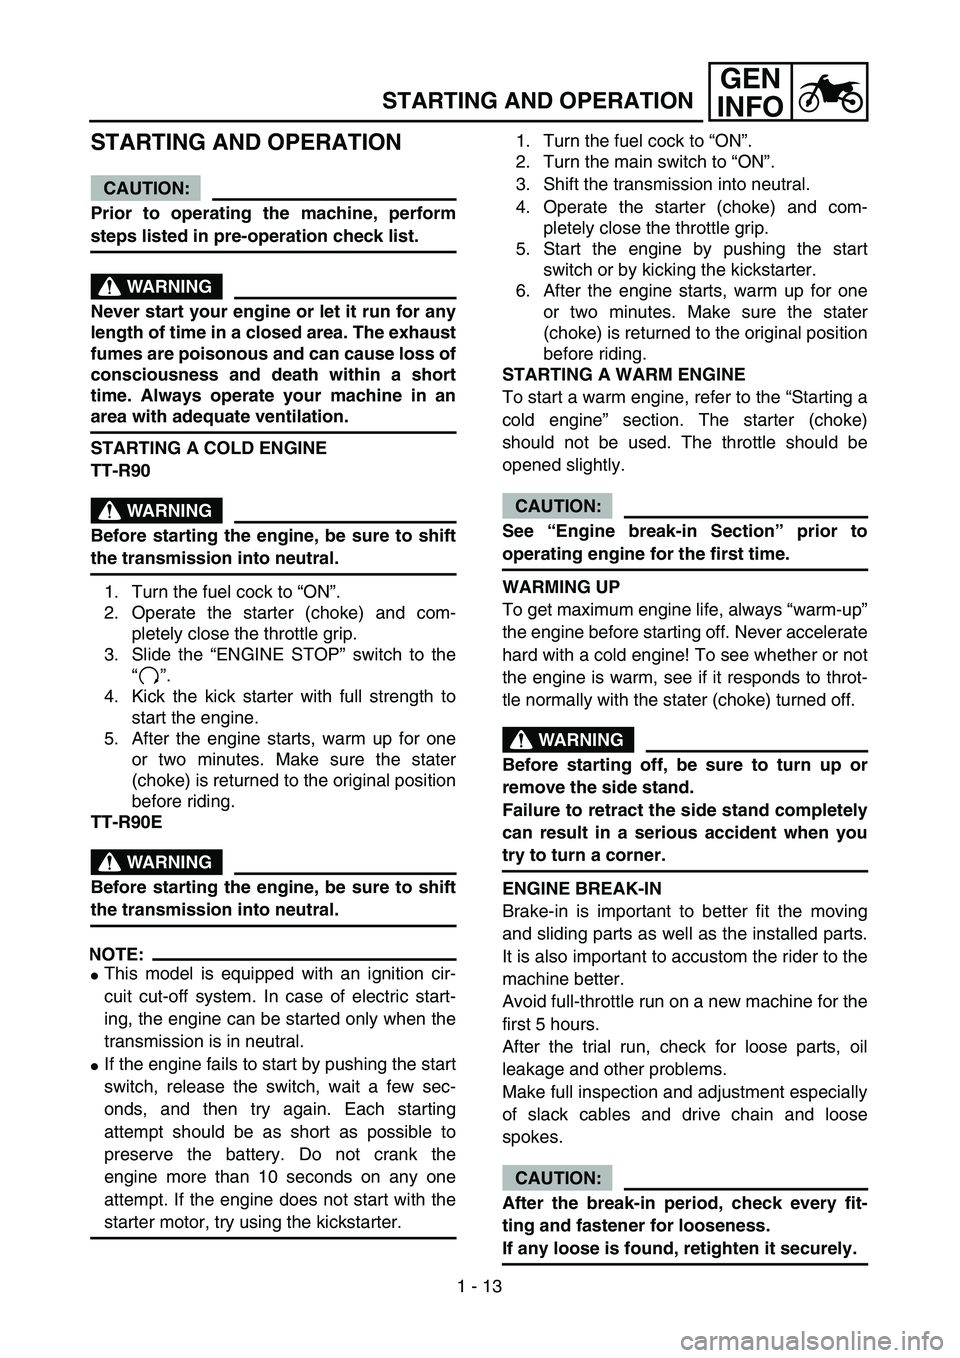 YAMAHA TTR90 2004  Notices Demploi (in French) 1 - 13
GEN
INFO
STARTING AND OPERATION
STARTING AND OPERATION
CAUTION:
Prior to operating the machine, perform
steps listed in pre-operation check list.
WARNING
Never start your engine or let it run f